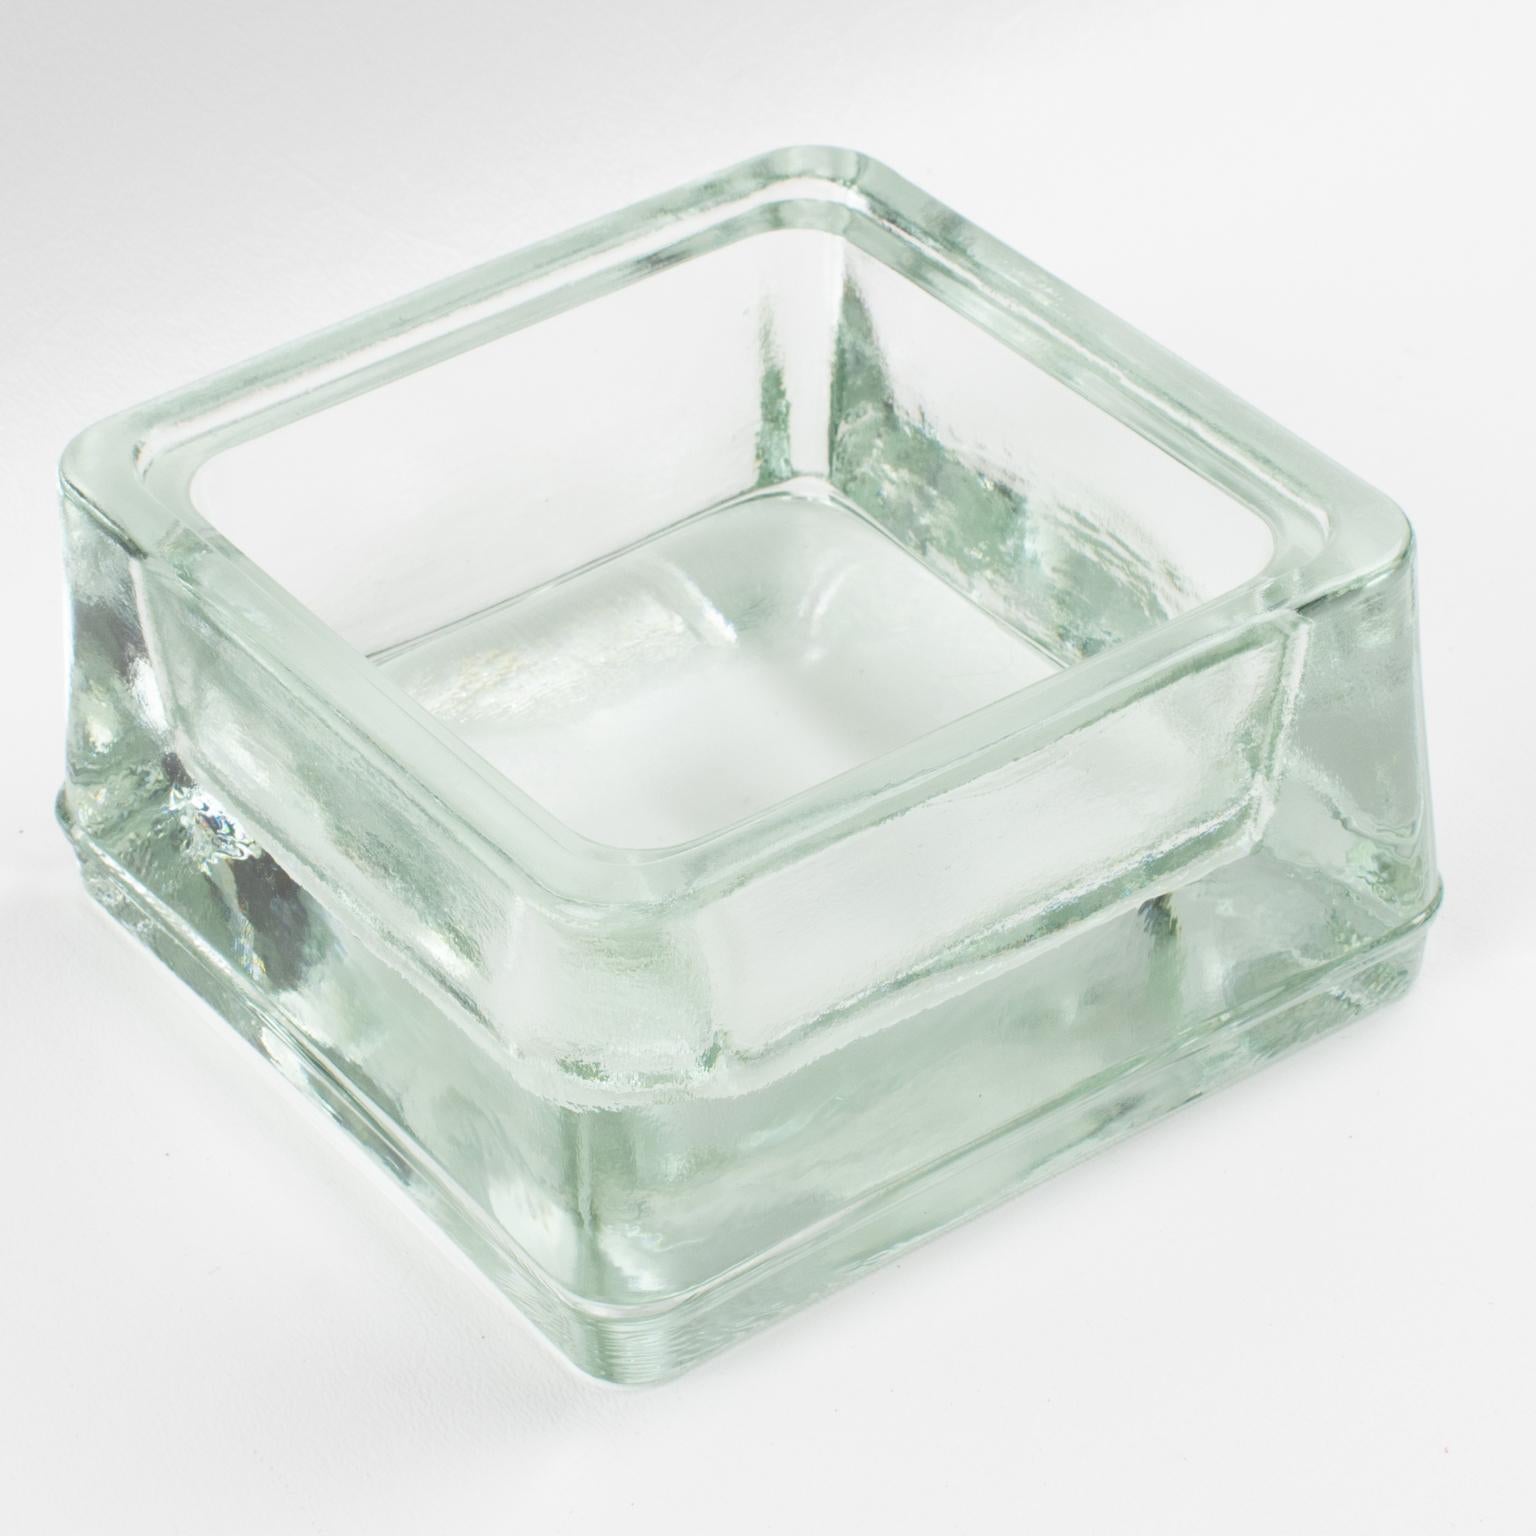 This sturdy industrial thick molded glass desktop accessory, desk tidy, ashtray, or catchall, was manufactured by Lumax, France, on an original design by Le Corbusier.
Measurements: 4.75 in wide (12 cm) x 4.75 in deep (12 cm) x 2.38 in high (6 cm).